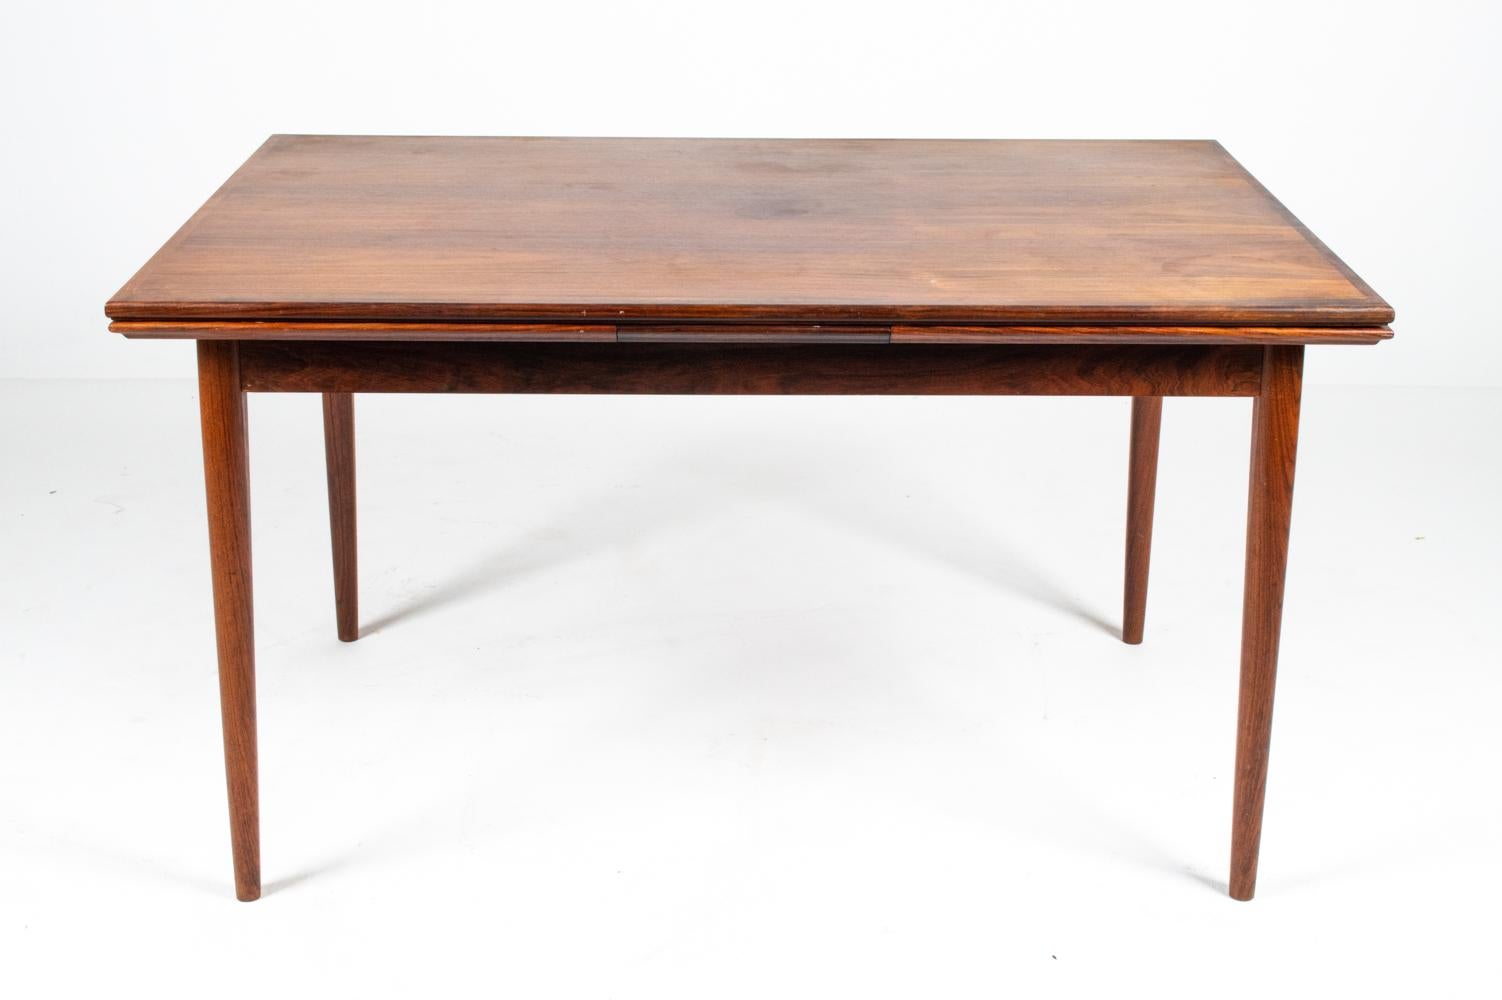 Scandinavian Modern Danish Mid-Century Rosewood Extension Dining Table, c. 1960's For Sale